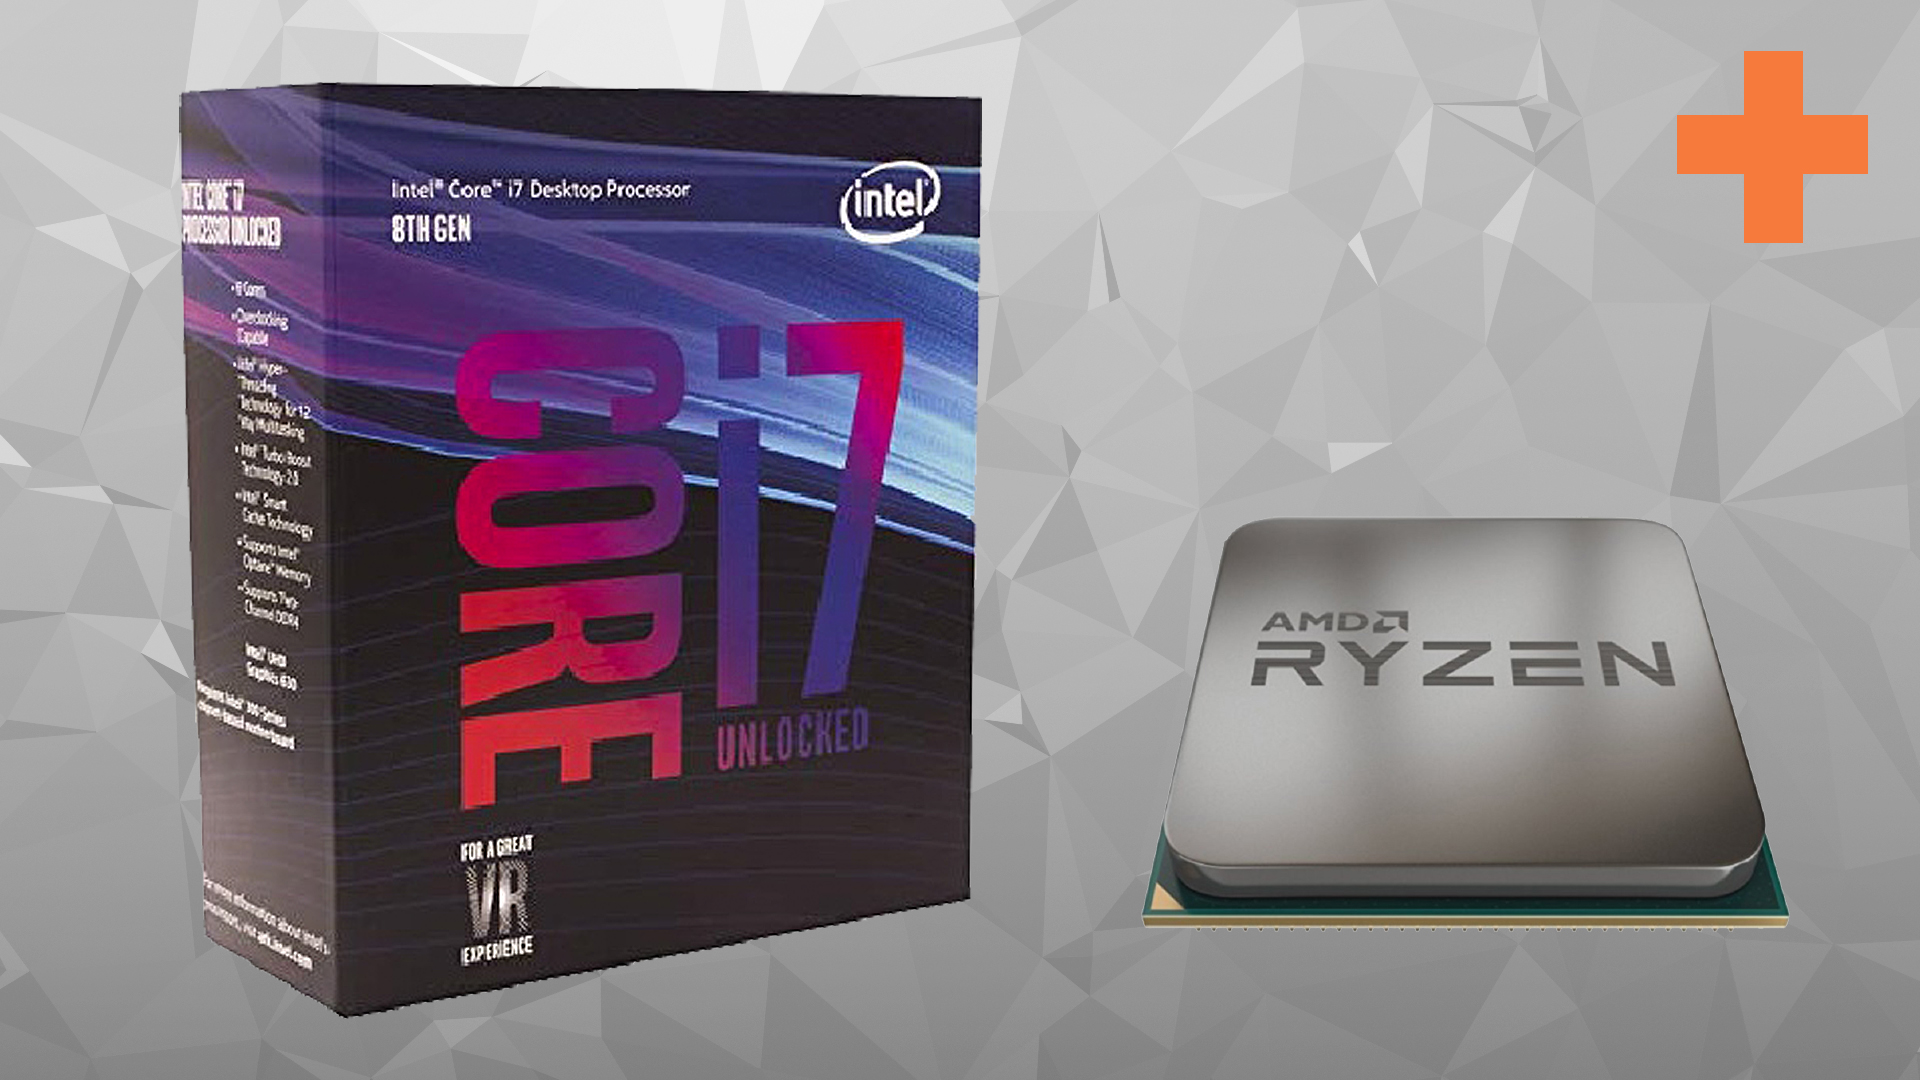 The Best Cpu For Pc Gaming In 21 Get The Best Gaming Cpu For Your Build Gamesradar